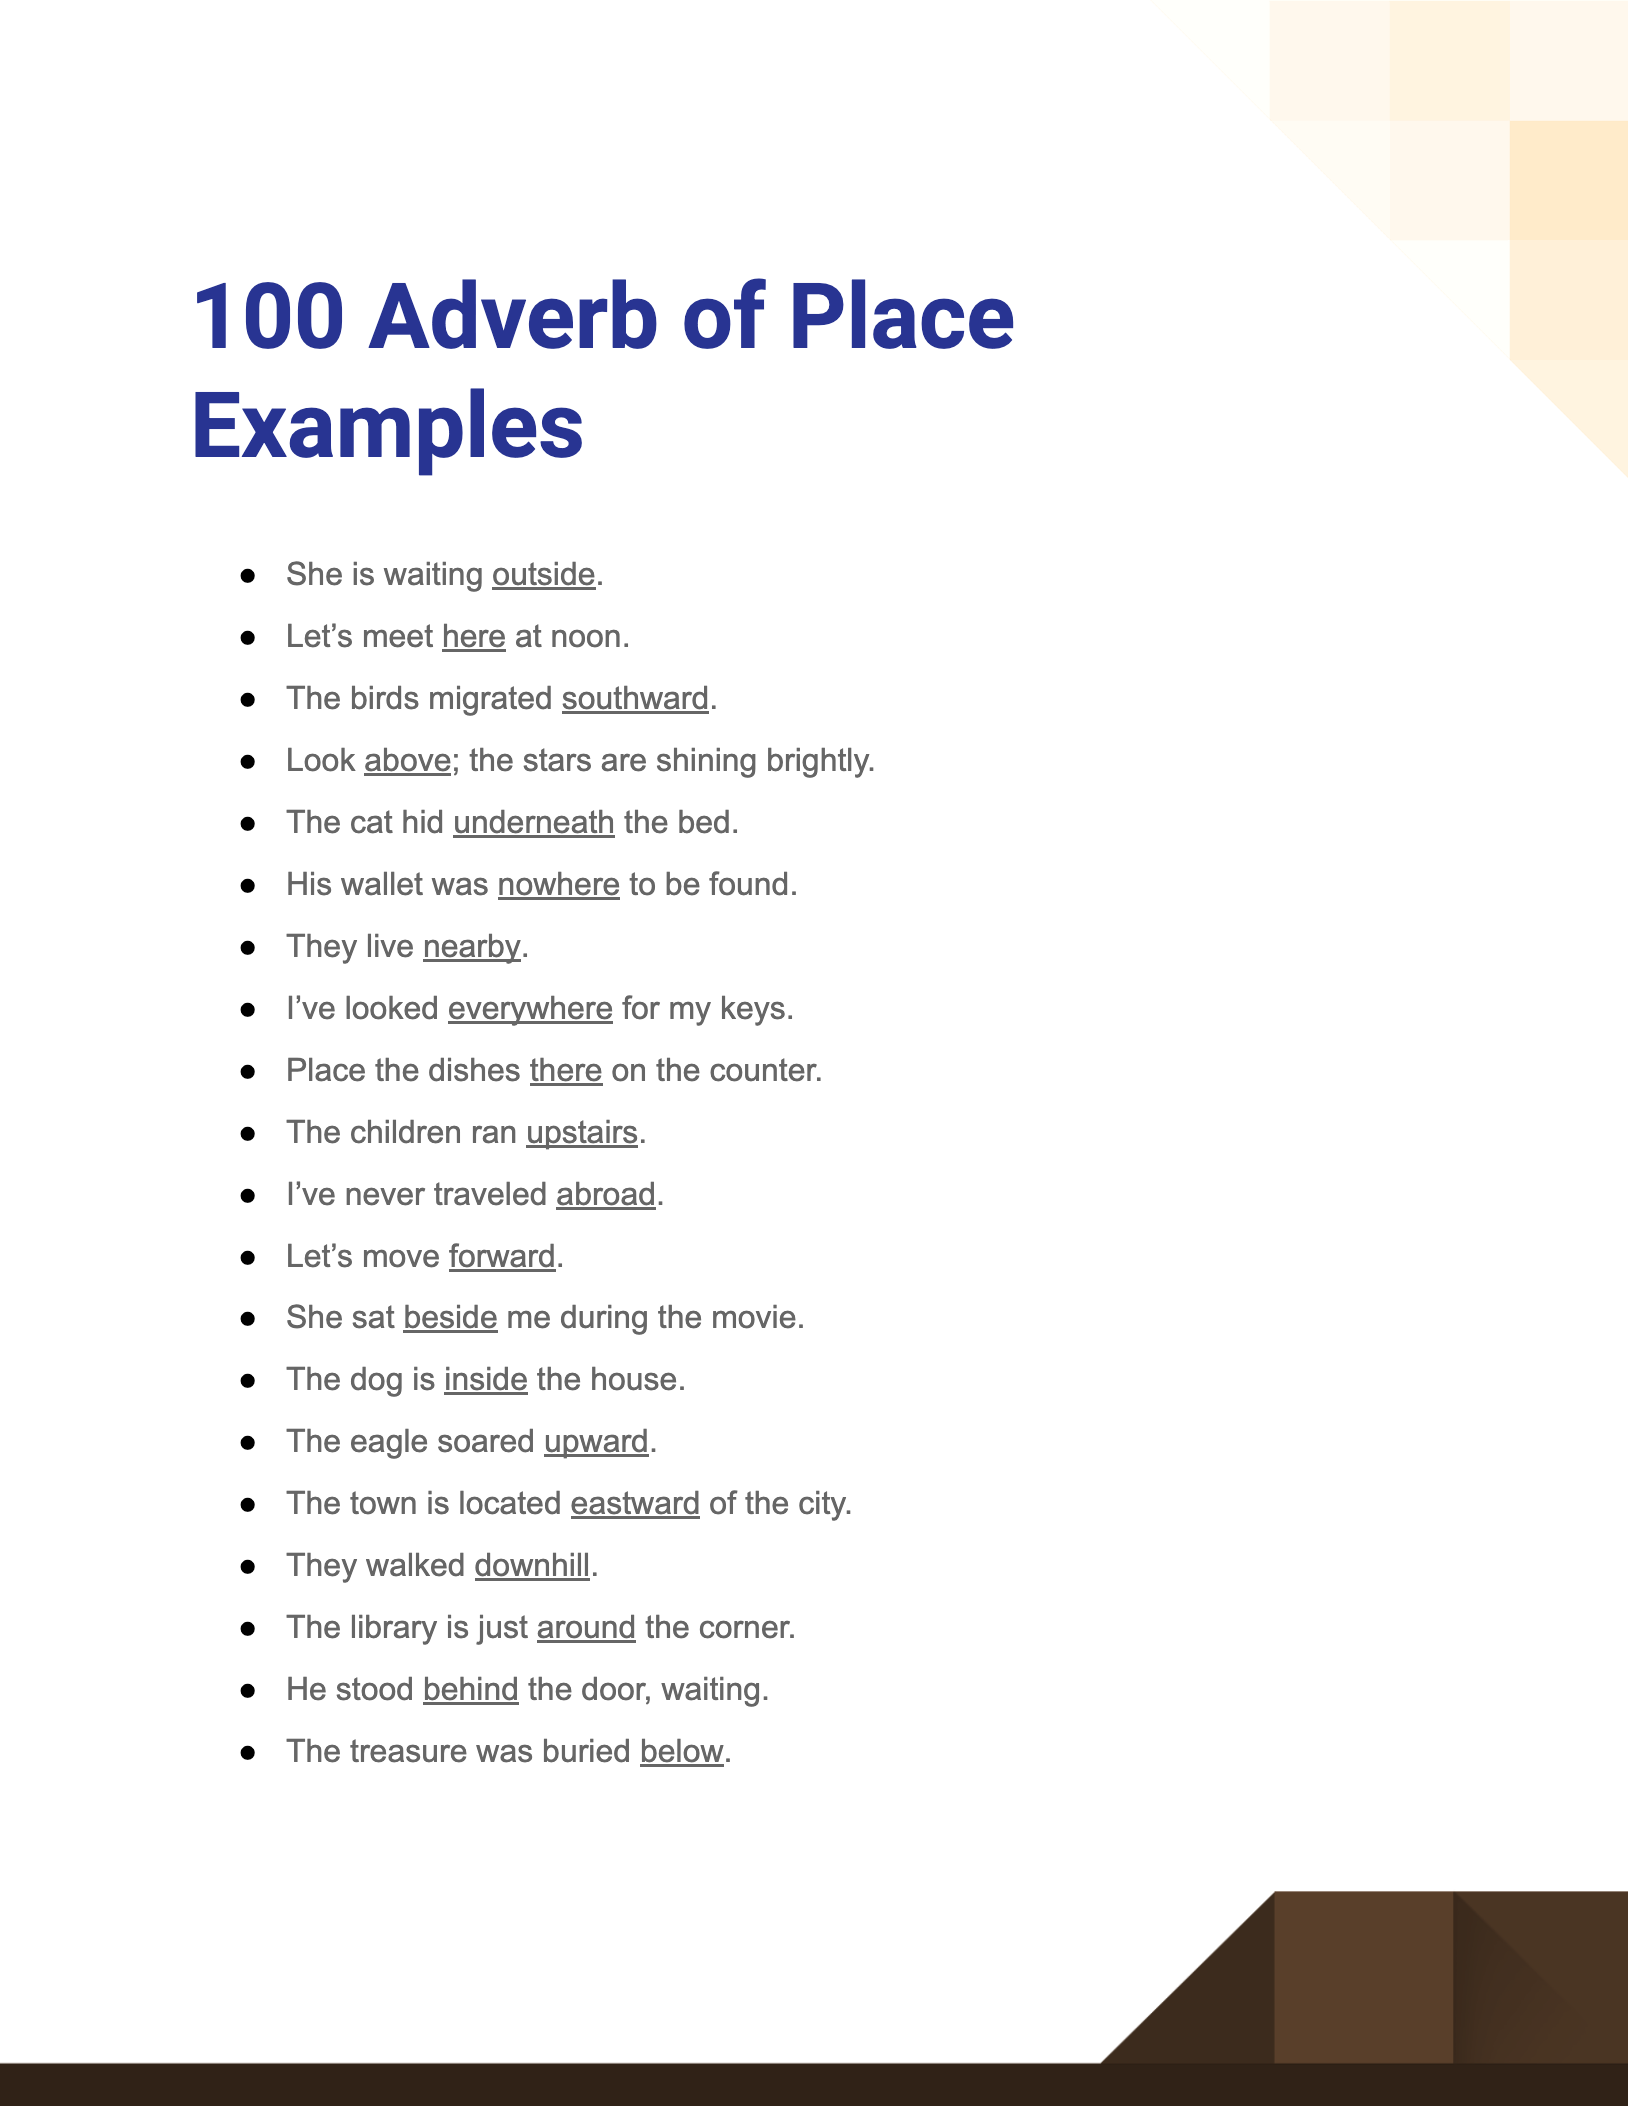 adverb of place examples